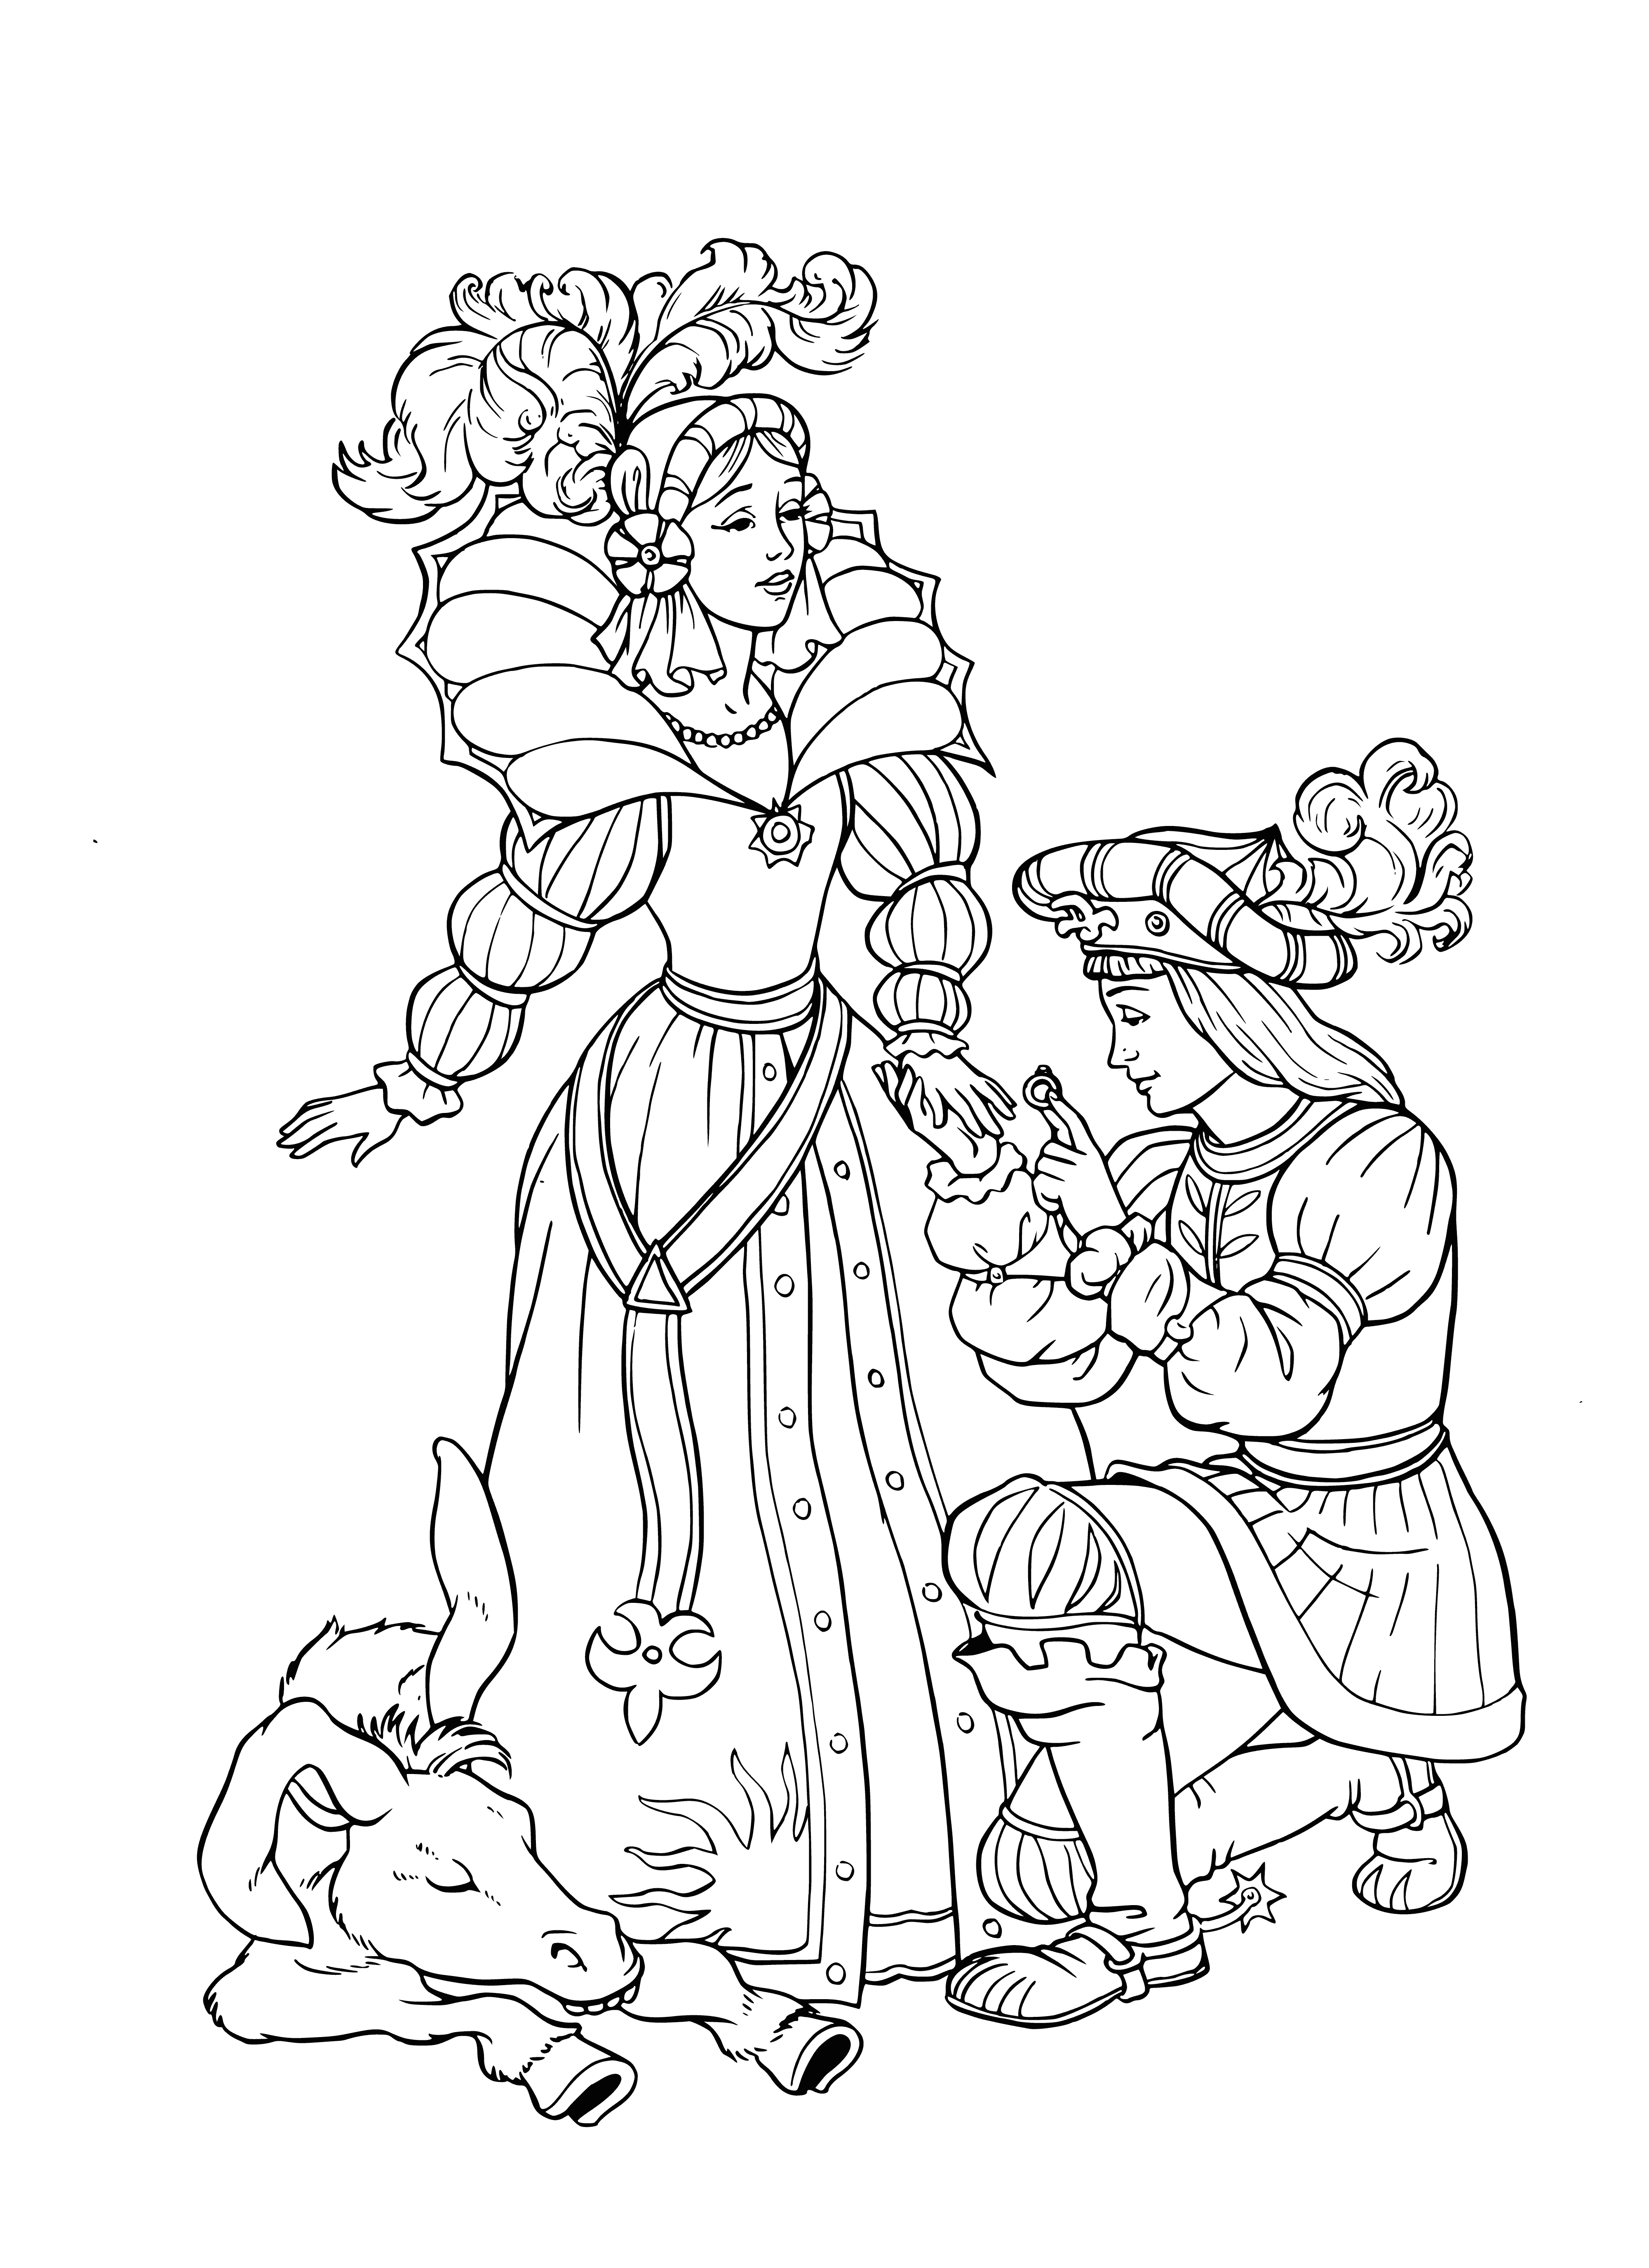 coloring page: Young prince & princess hold hands before castle; he's wearing blue coat with gold buttons and she's wearing a pink dress. #Fairytale